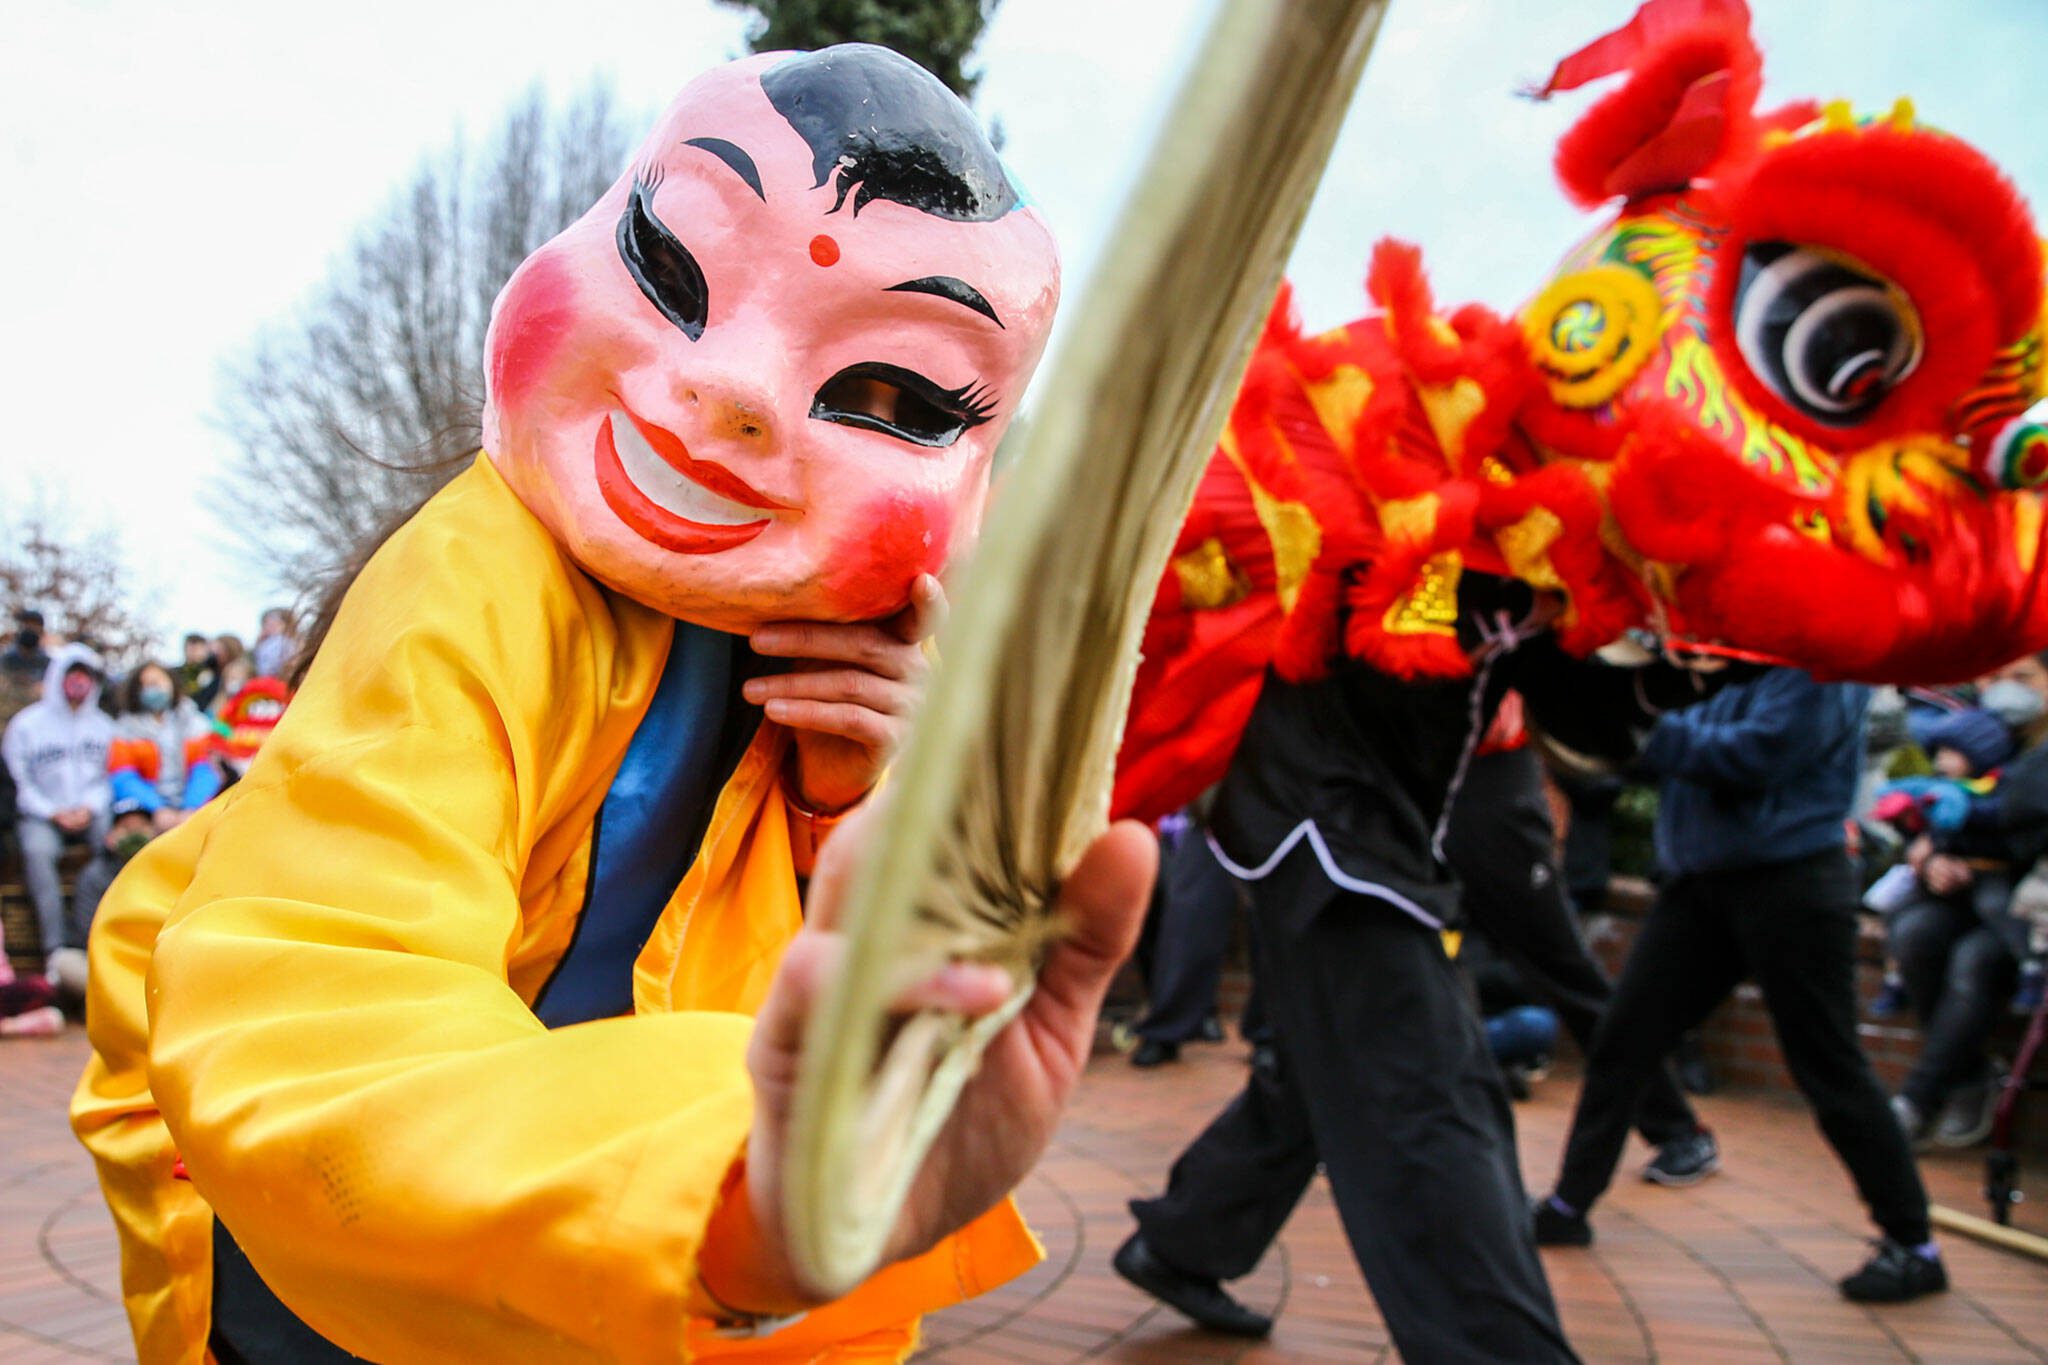 Dai Tou Fut, the big head Buddha, leads the lion dance to celebrate the Lunar New Year on January 29, 2022 in downtown Edmonds, Washington. (Kevin Clark / The Herald)